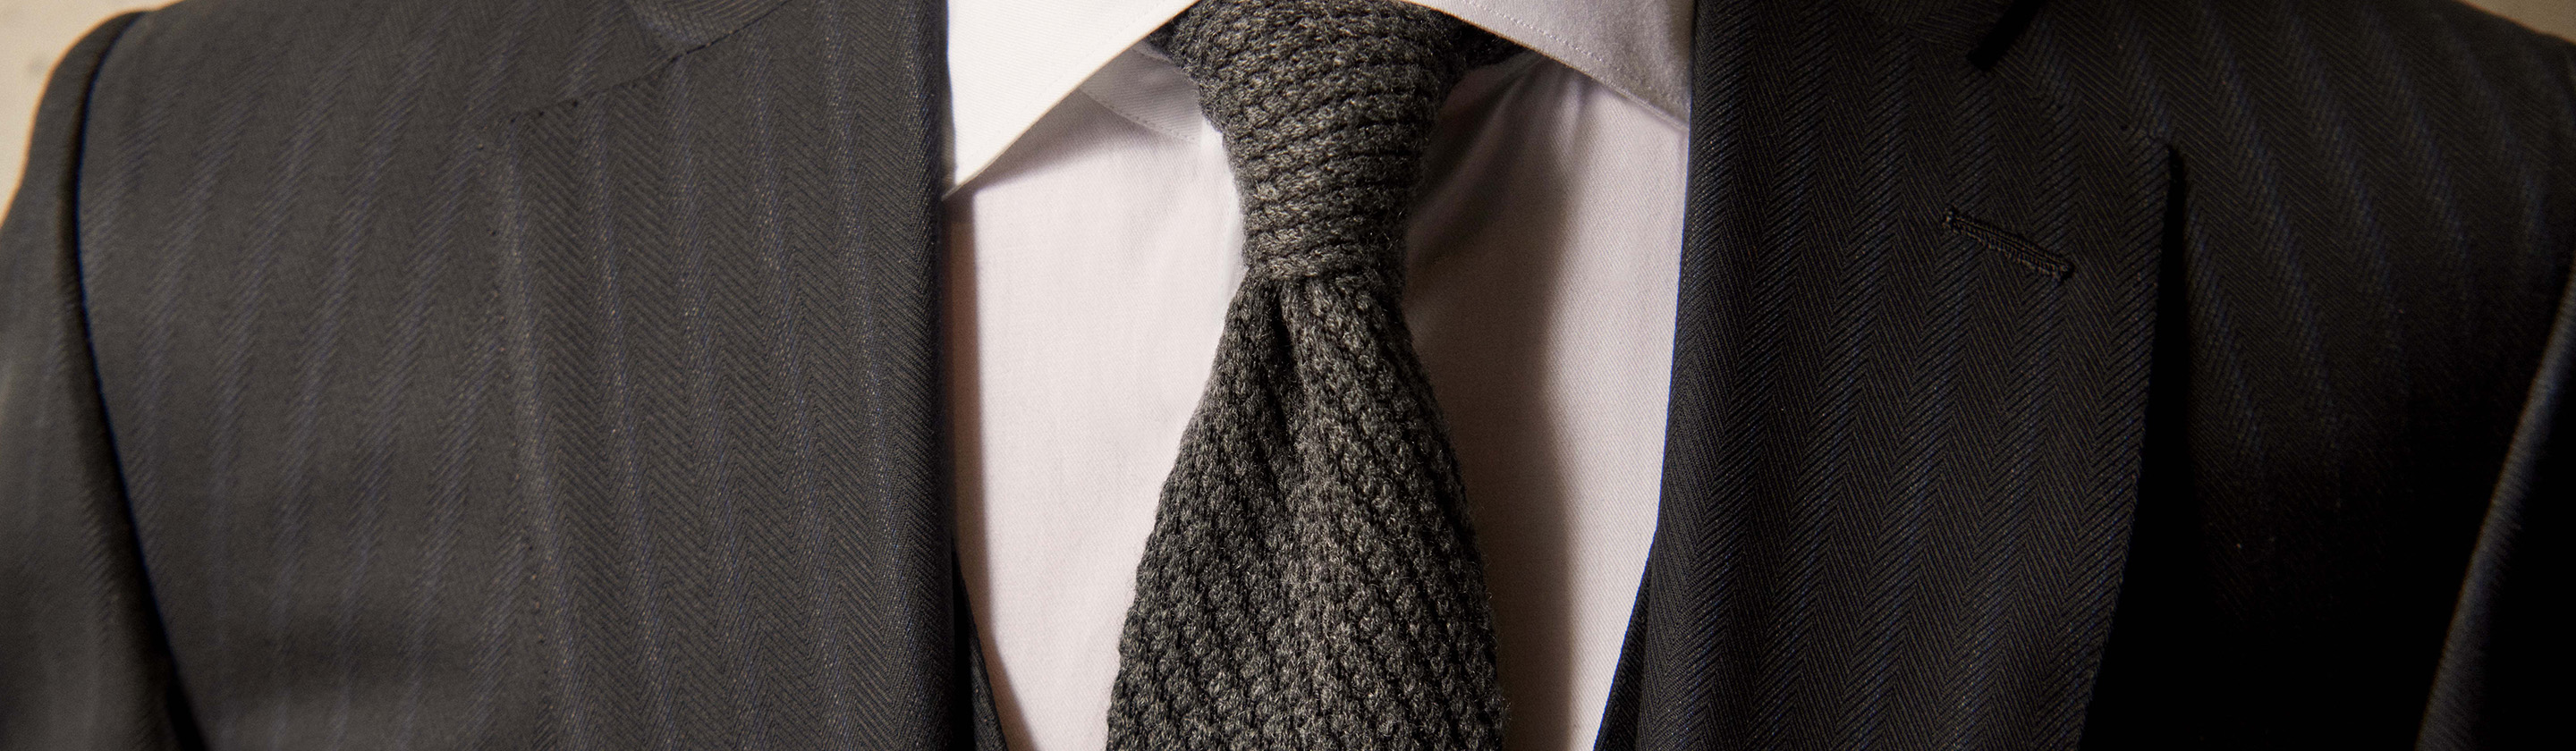 Ties and Pocket Squares | Brioni® US Official Store